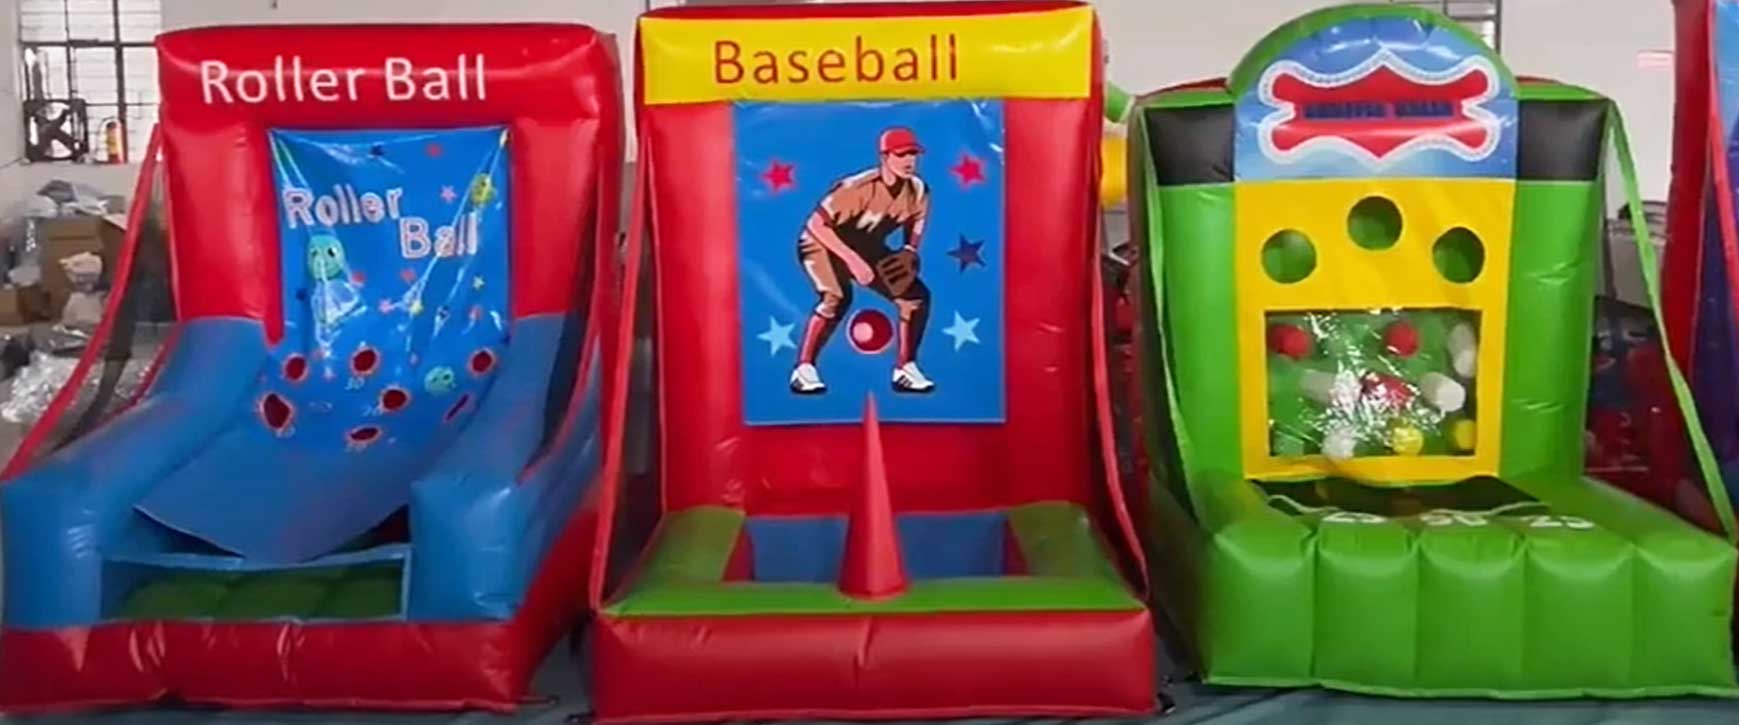 inflatable roller ball game